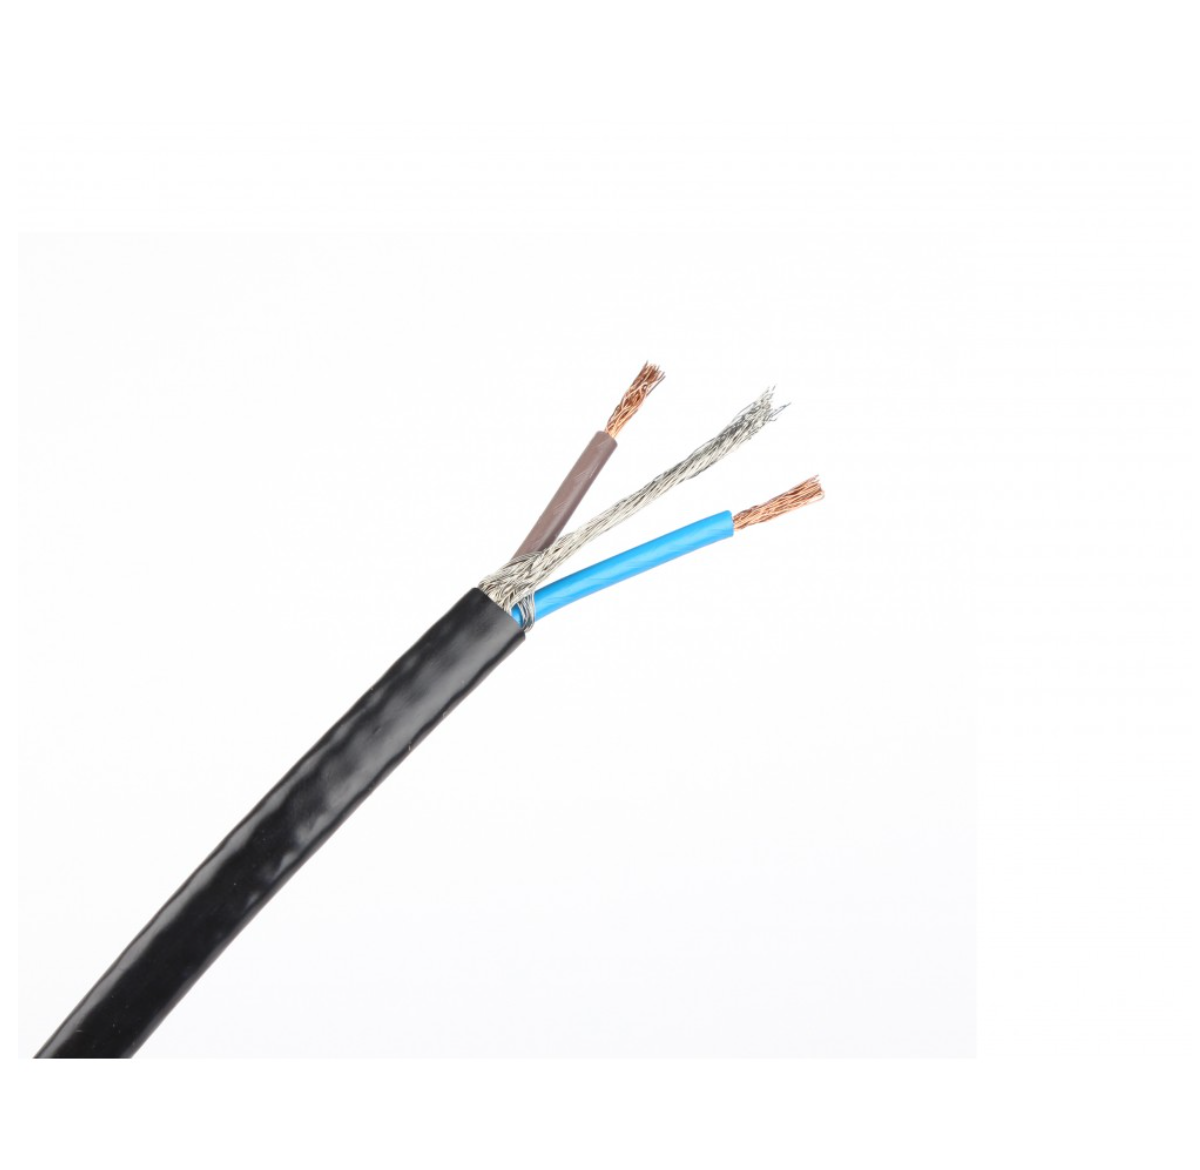 Heating cable - 45m